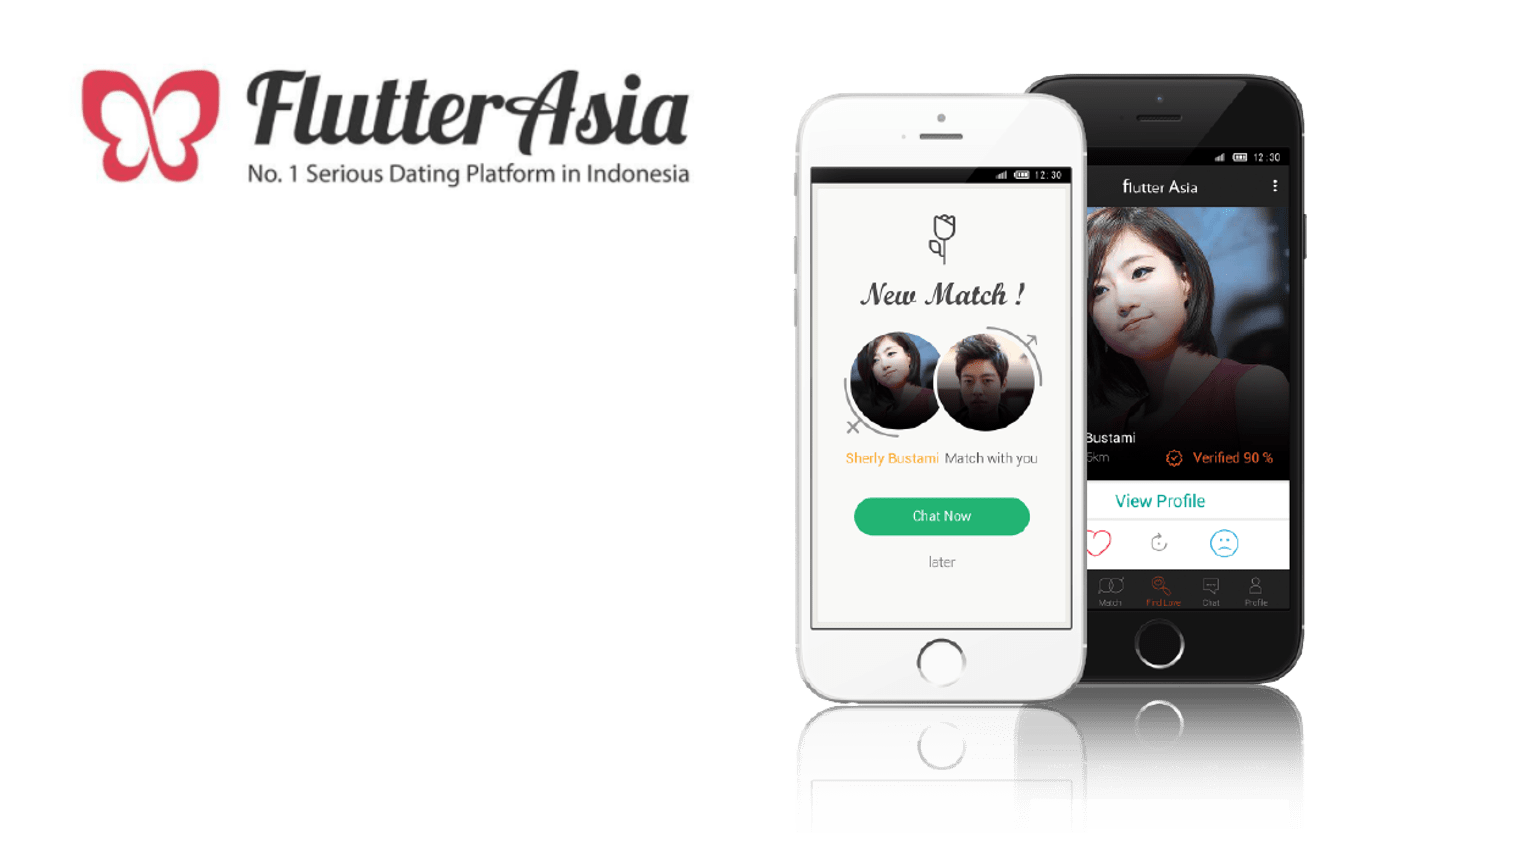 Indonesia: Dating app Flutter Asia buys Perfect Match Jakarta